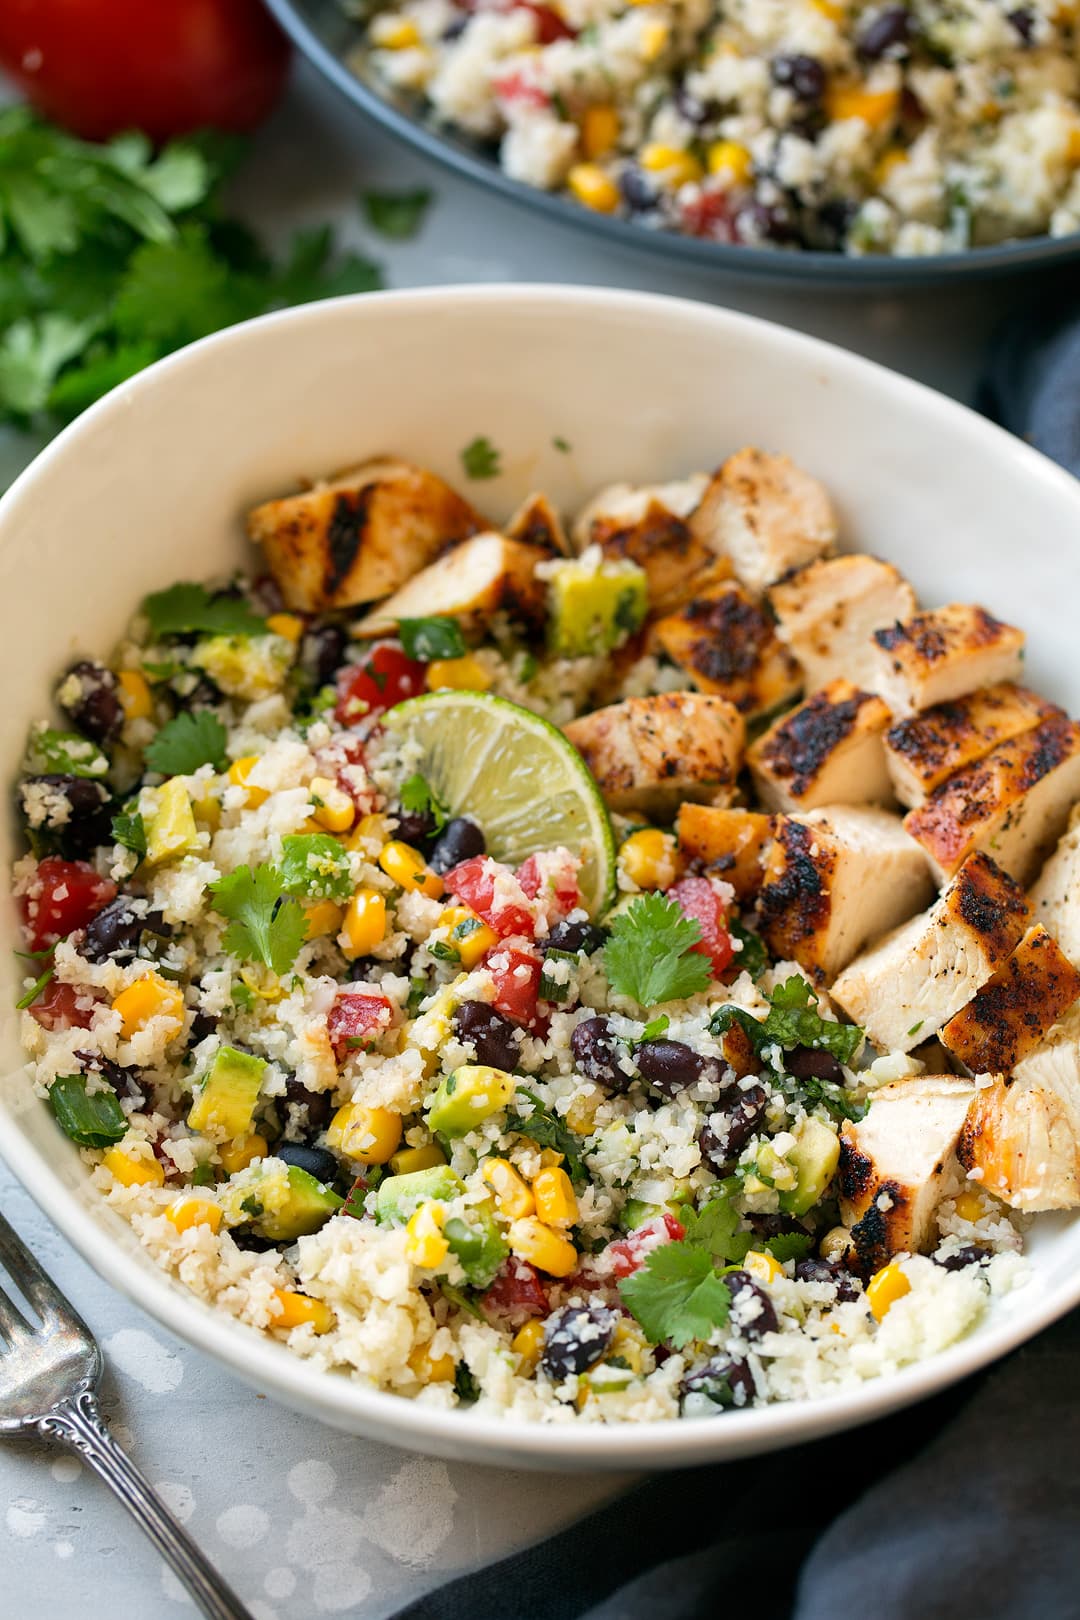 Cauliflower rice with added chicken, veggies and black beans. Seasoned with cilantro and lime.